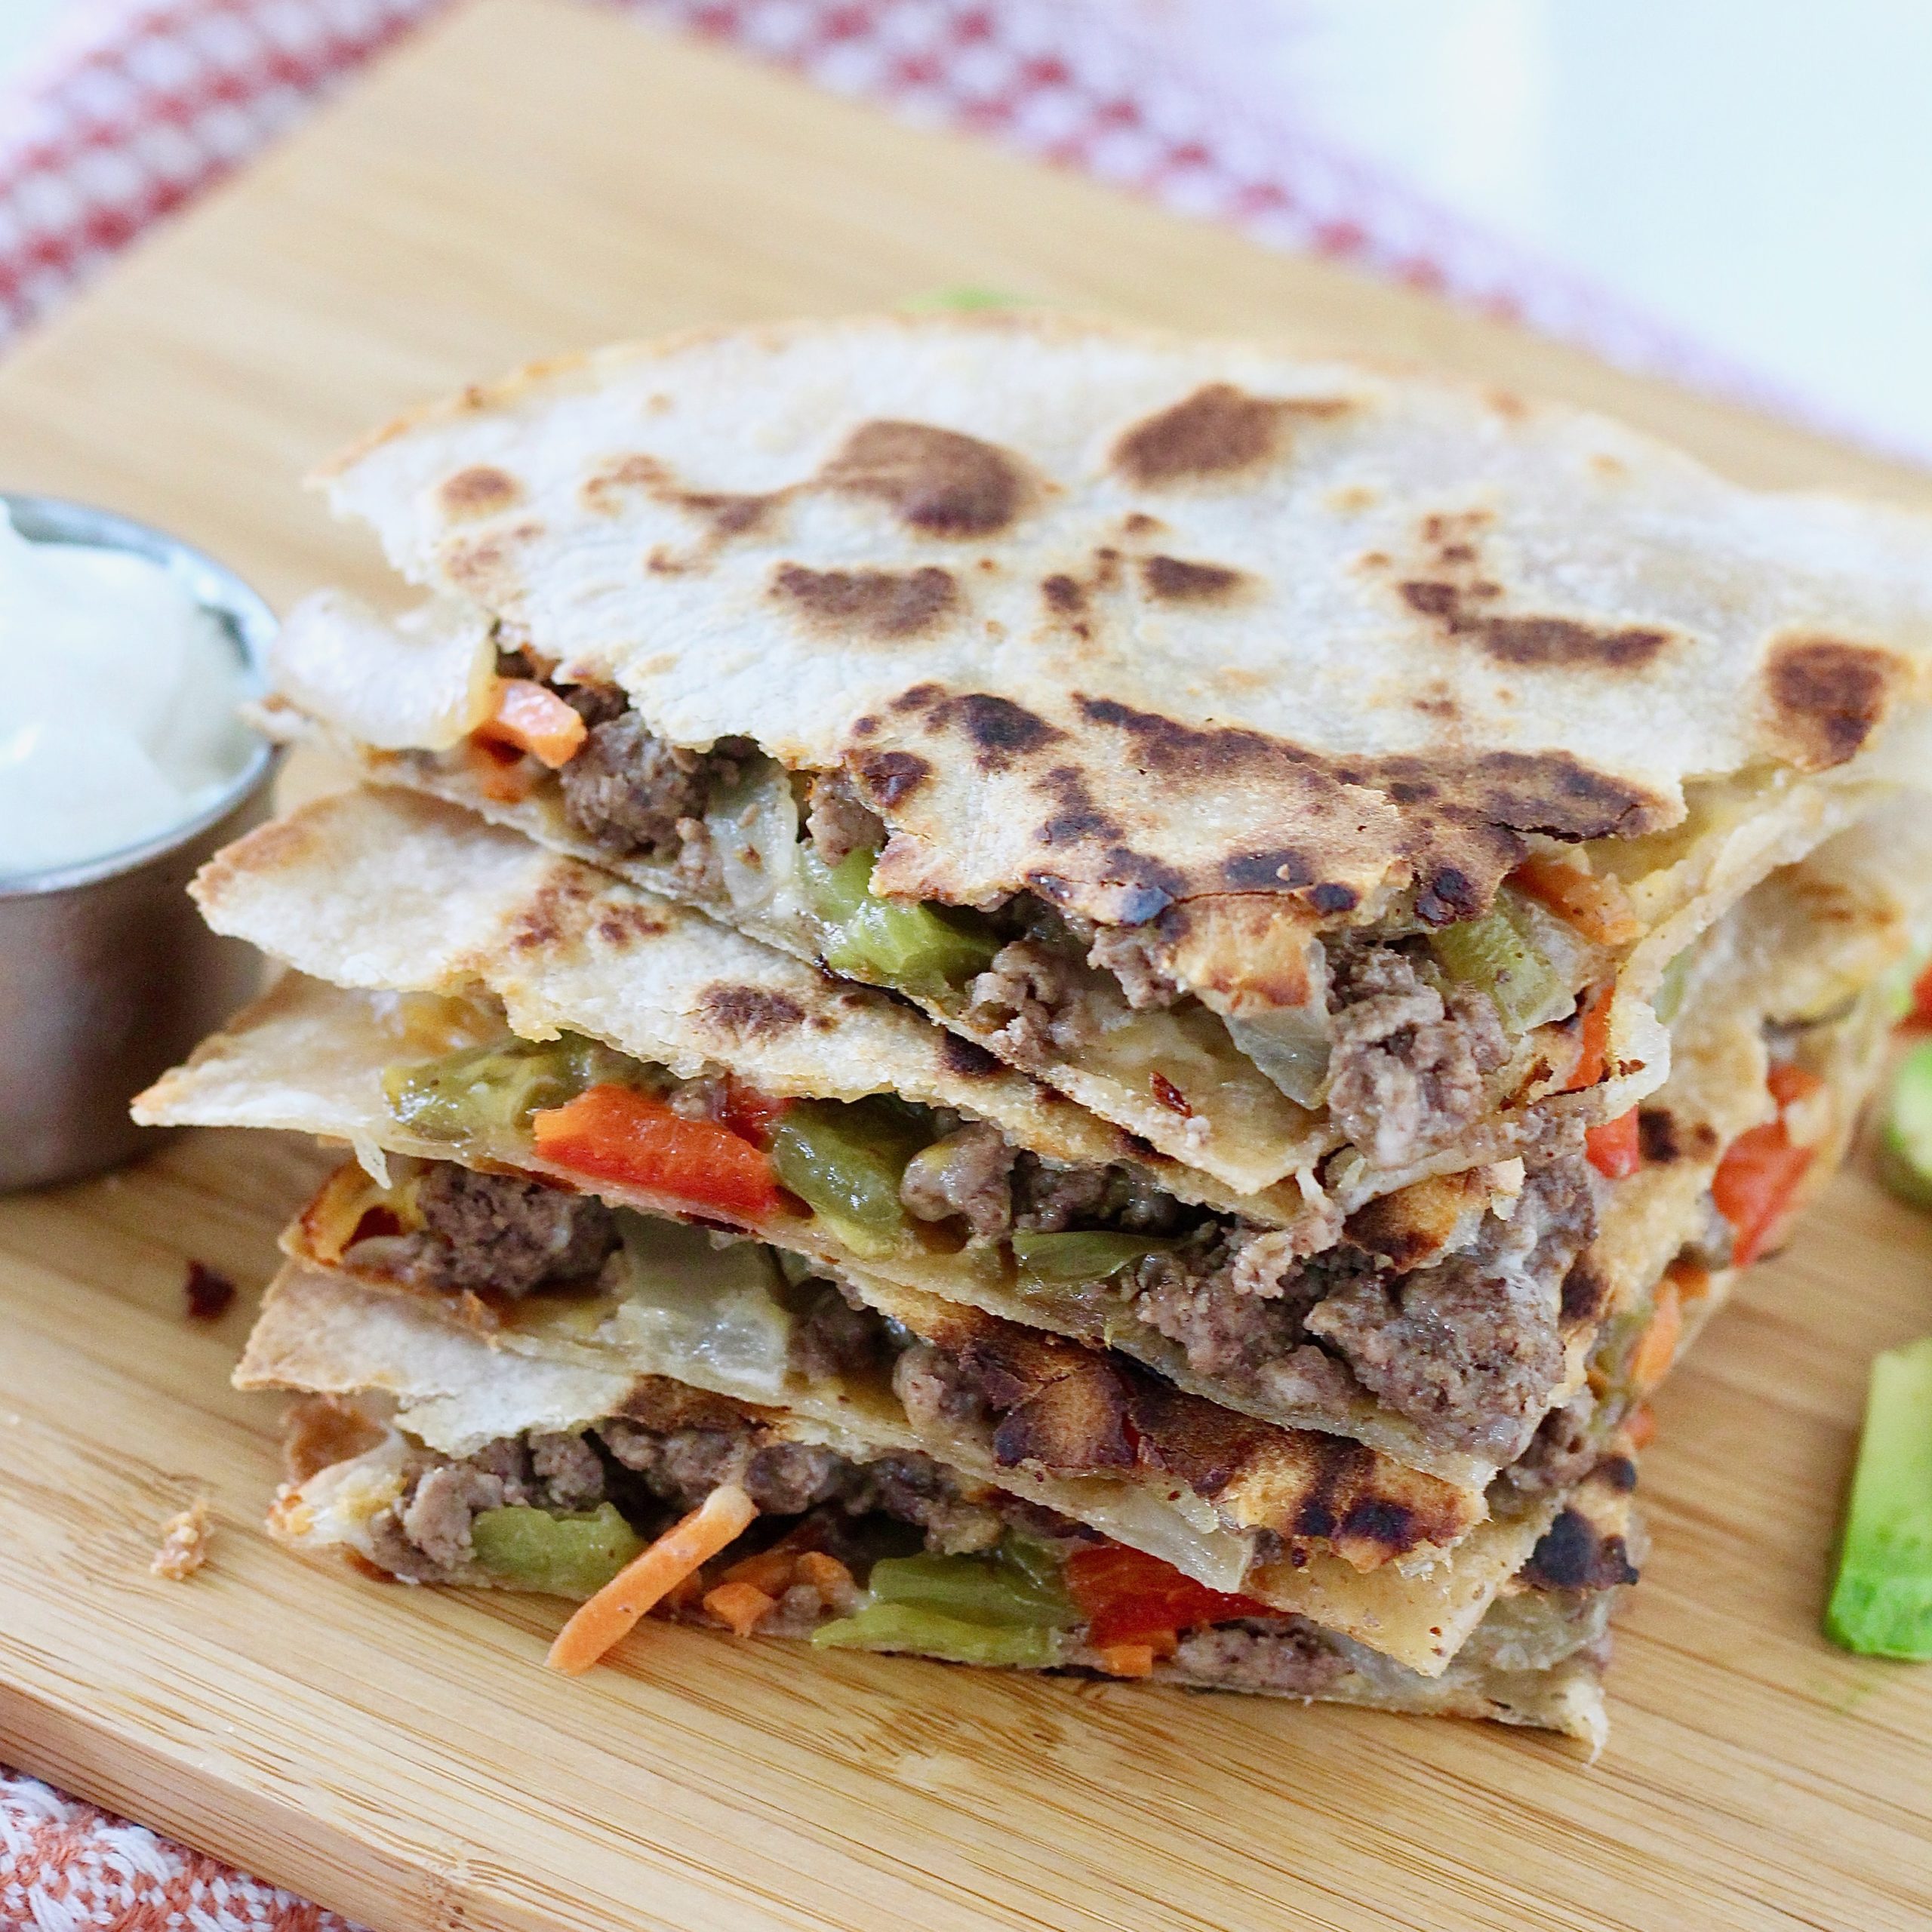 veggie and beef quesadillas with sour cream